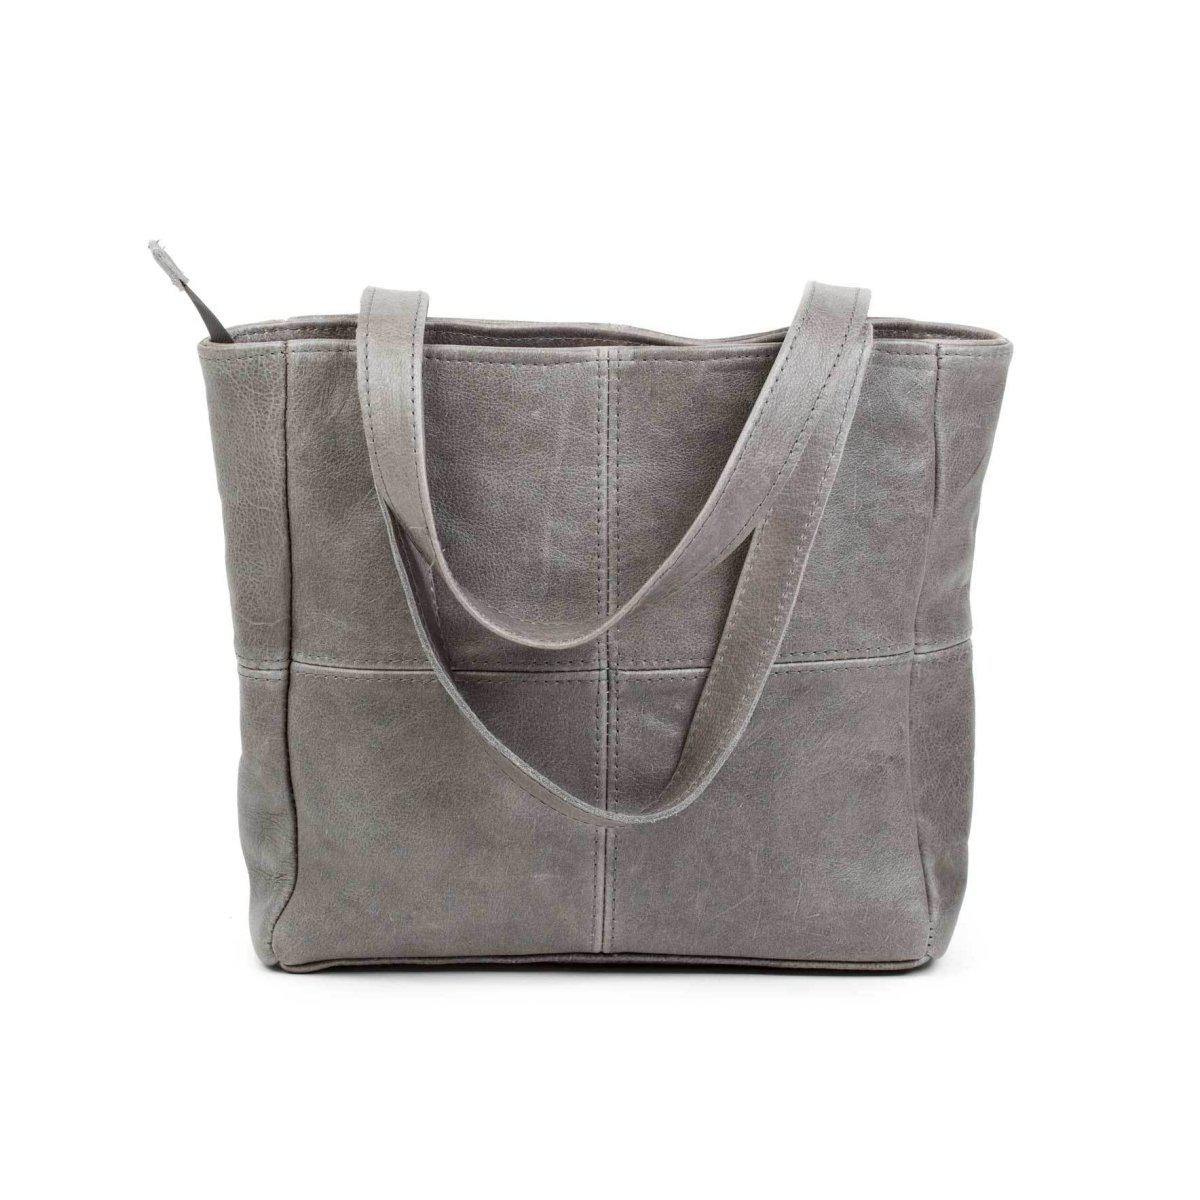 MIRELLE Small Classic Shopper and Ladies Wallet - Combo - Mirelle Leather and Lifestyle